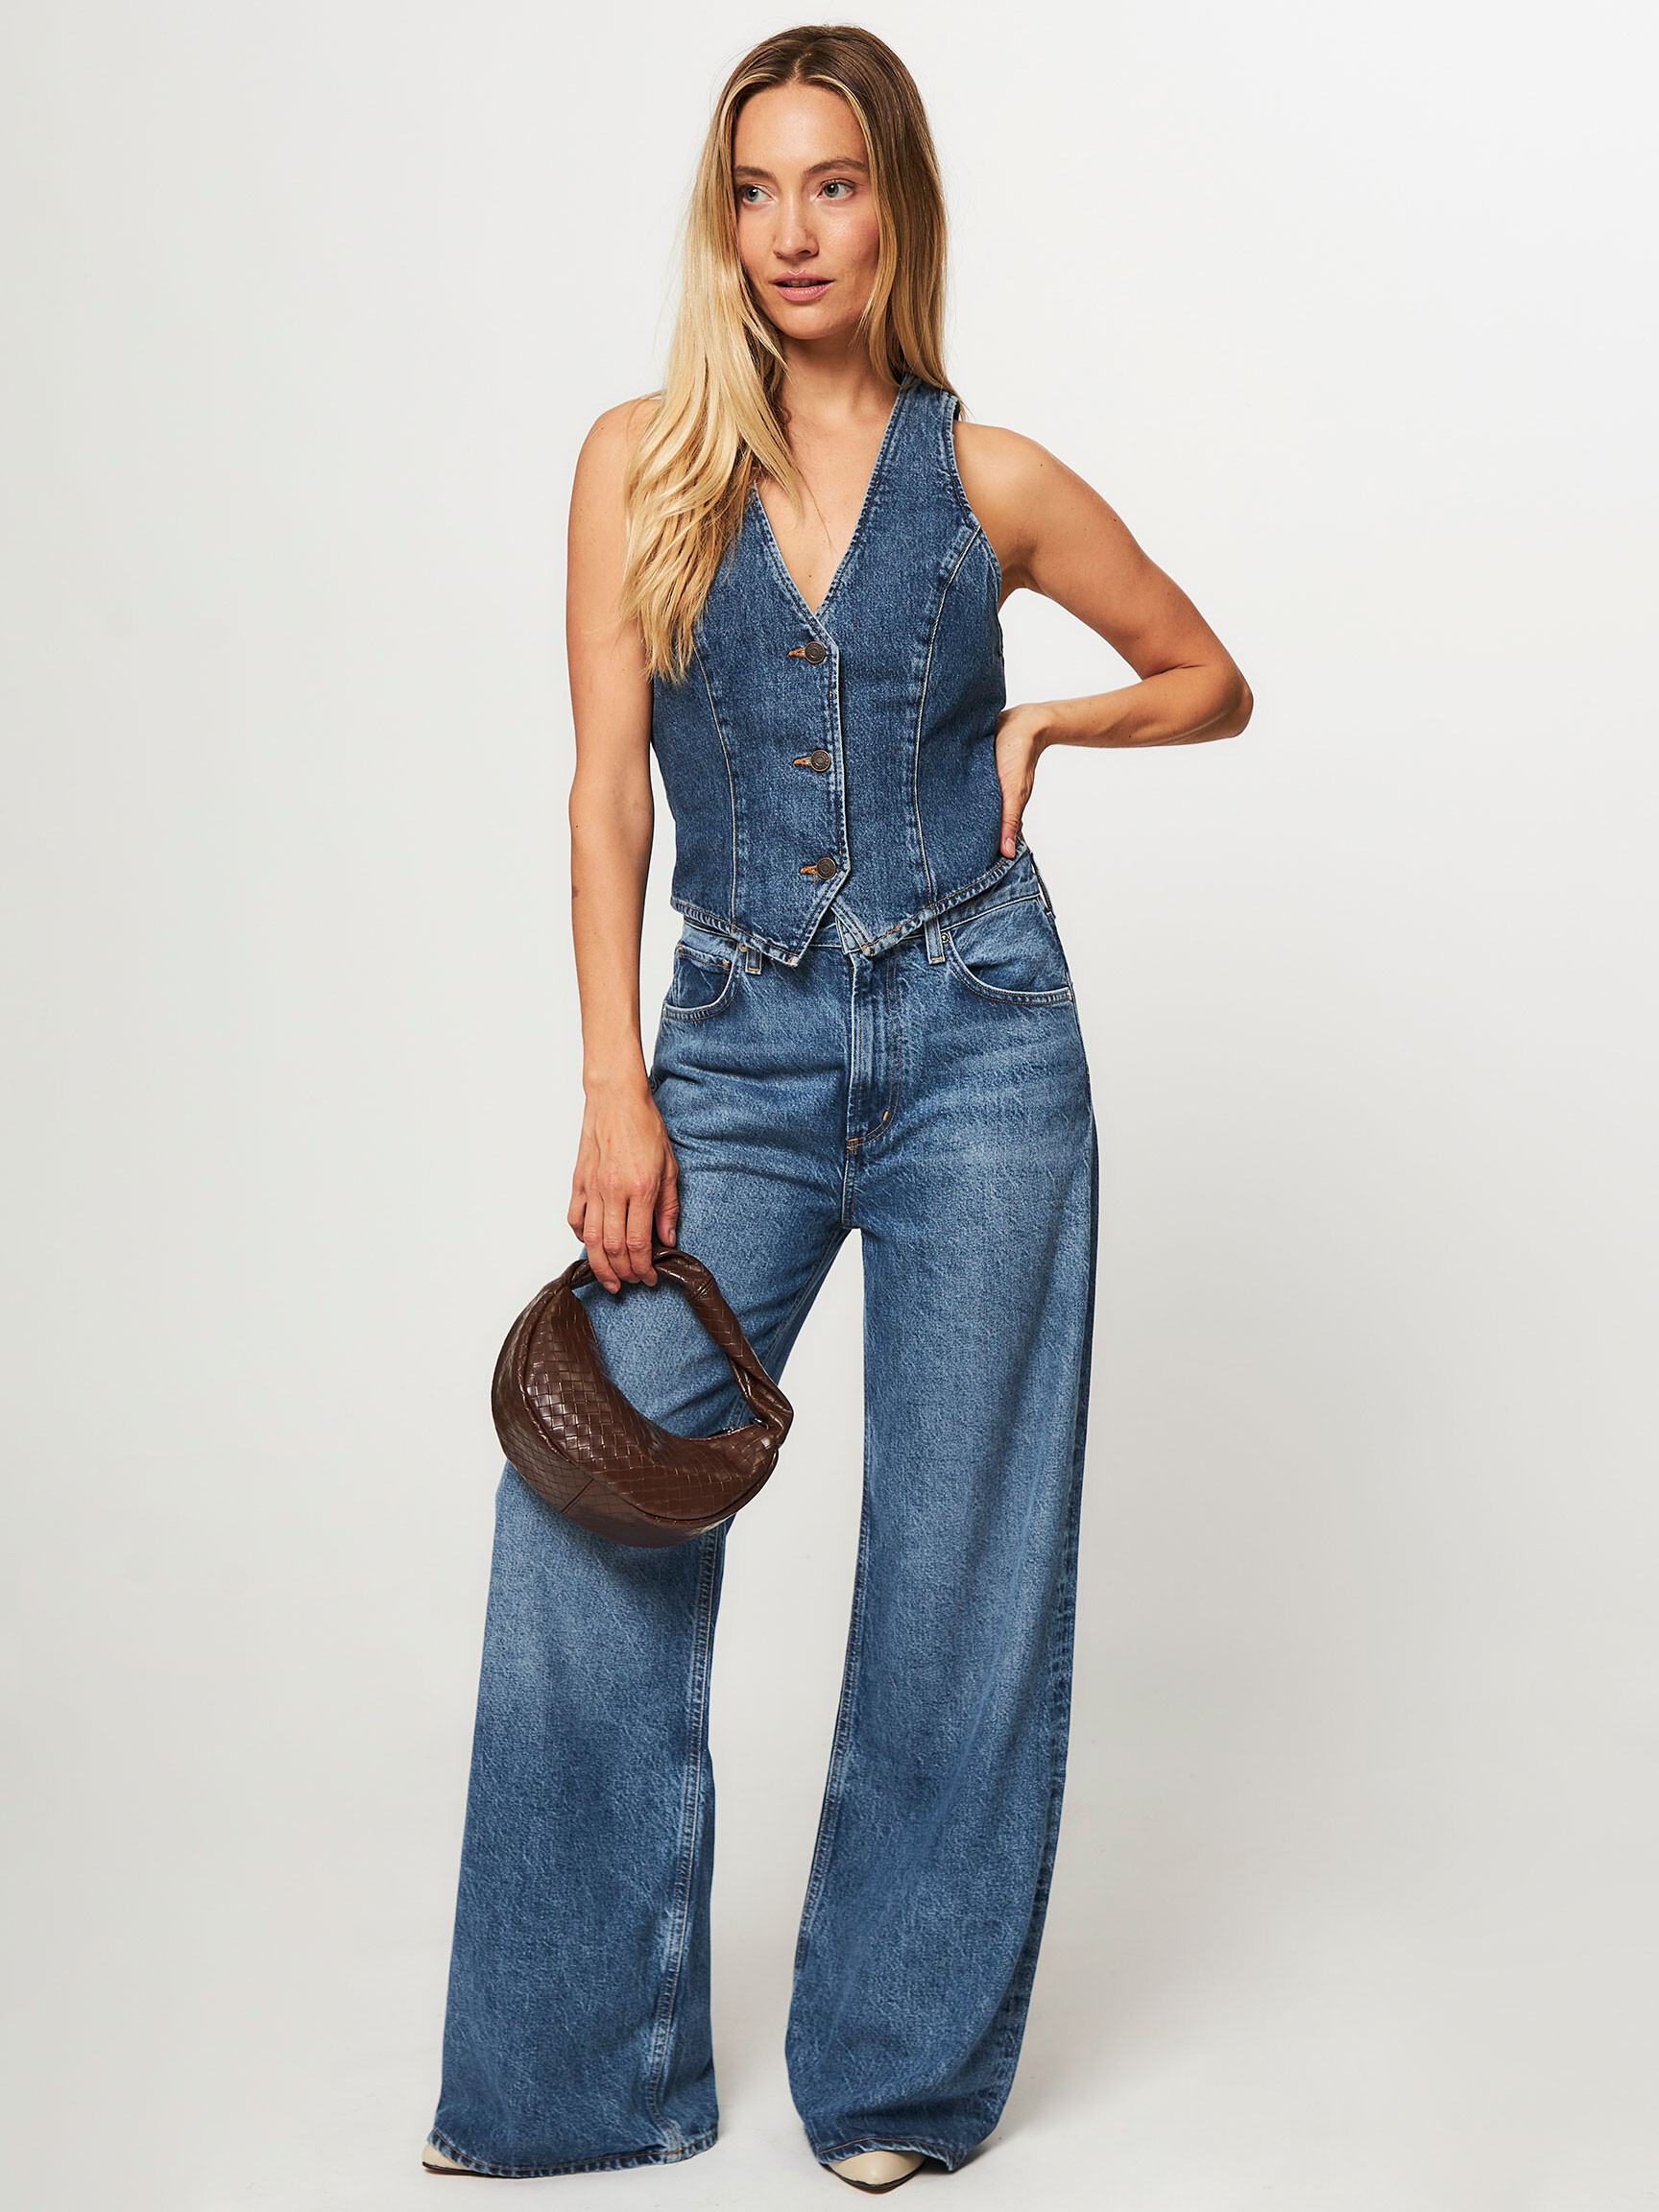 Club Monaco Is Launching Denim With Citizens of Humanity, Mother, and  McGuire | Glamour